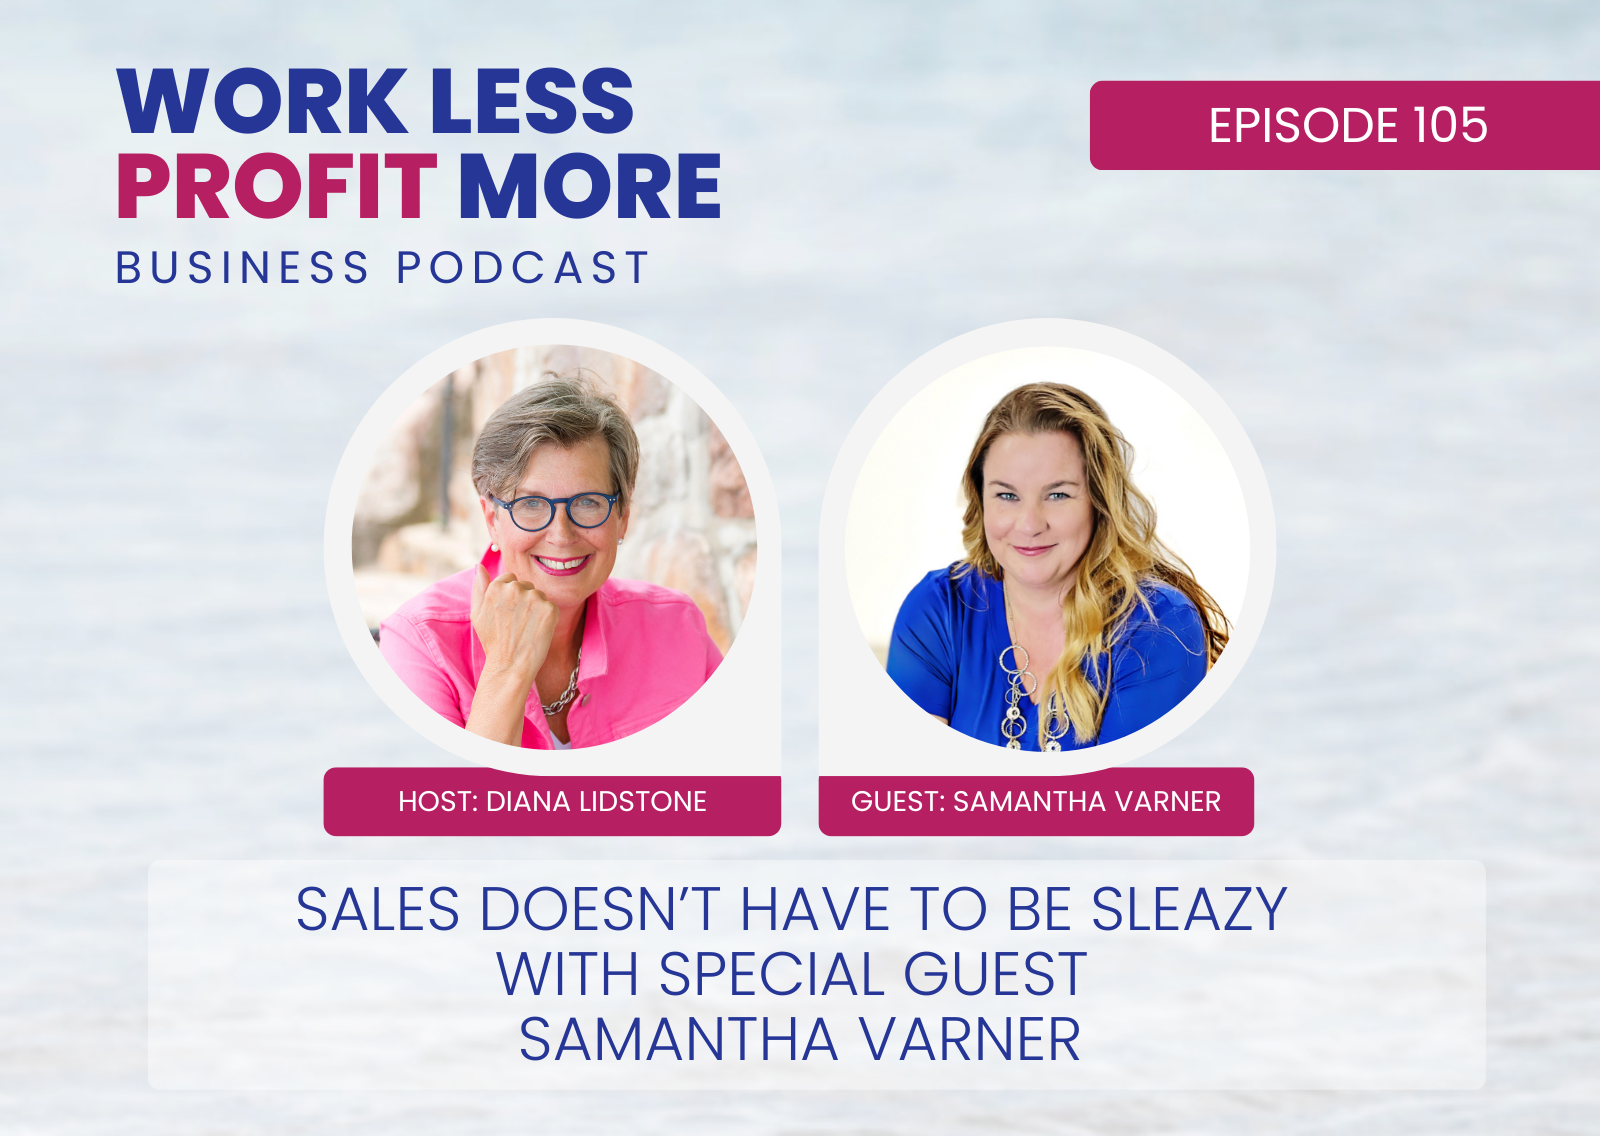 Sales Doesn’t Have to be Sleazy with Special Guest Samantha Varner